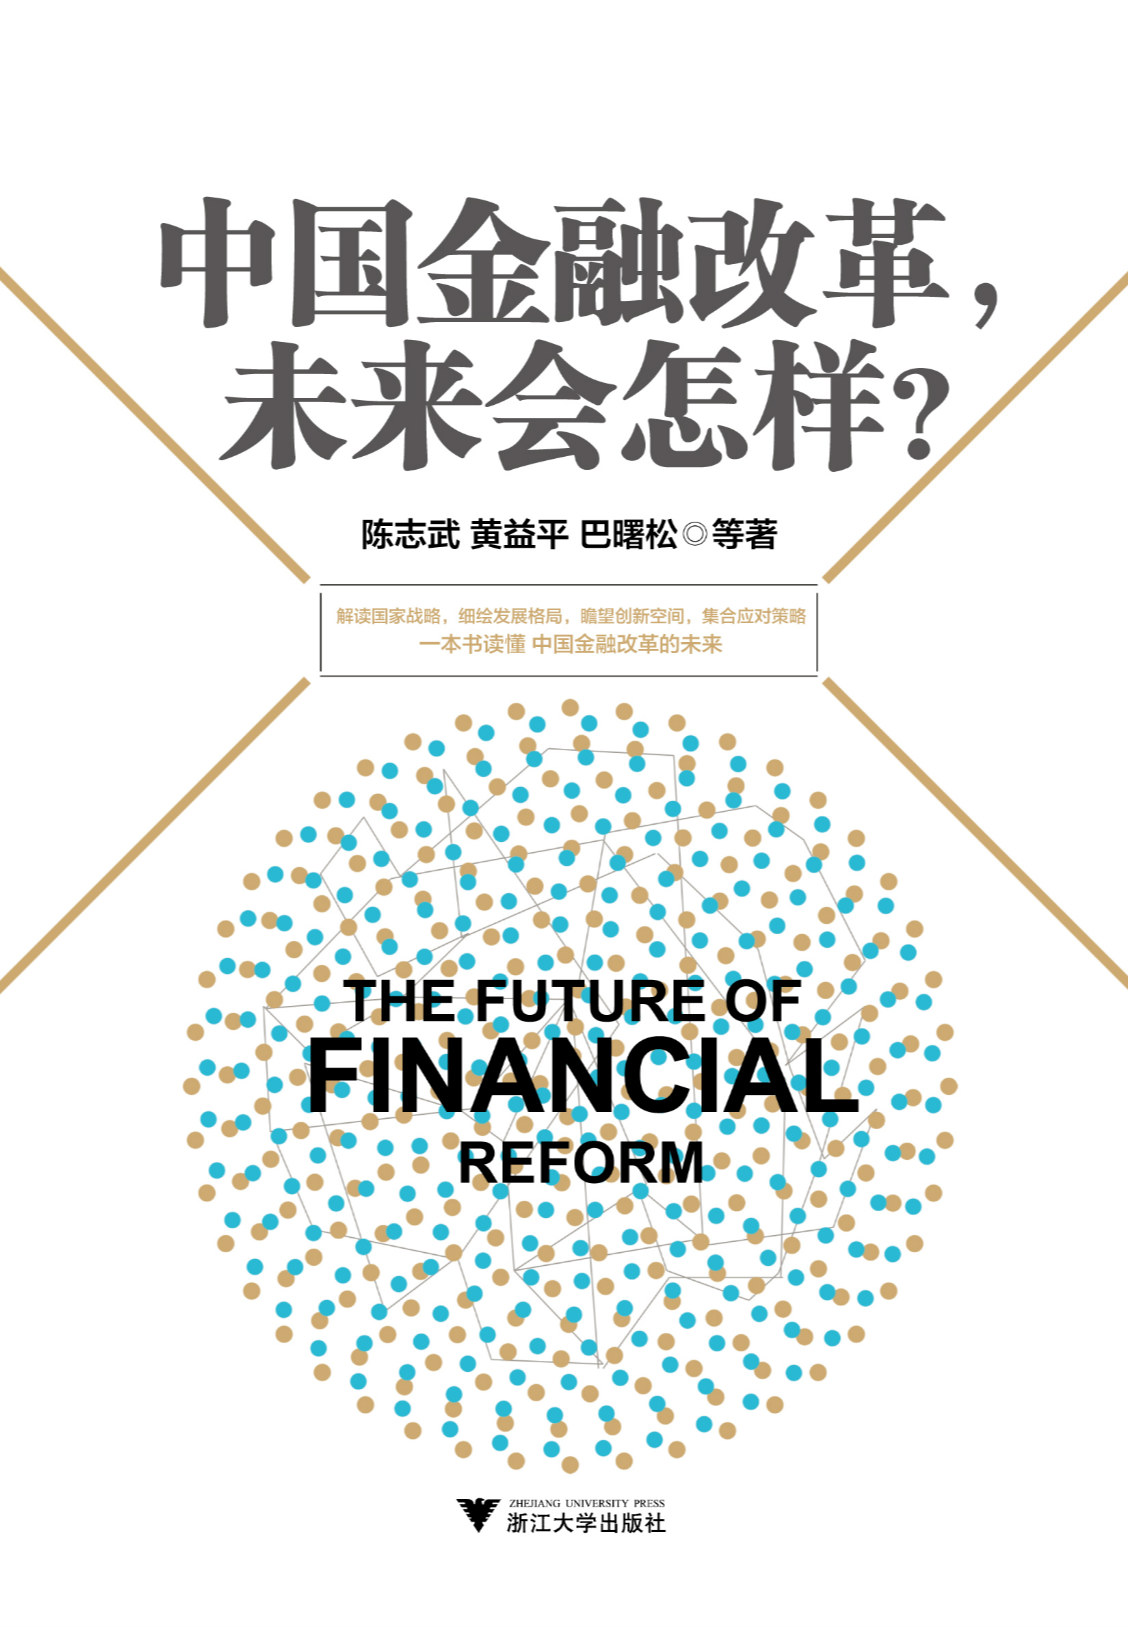 The Future of Financial Reform